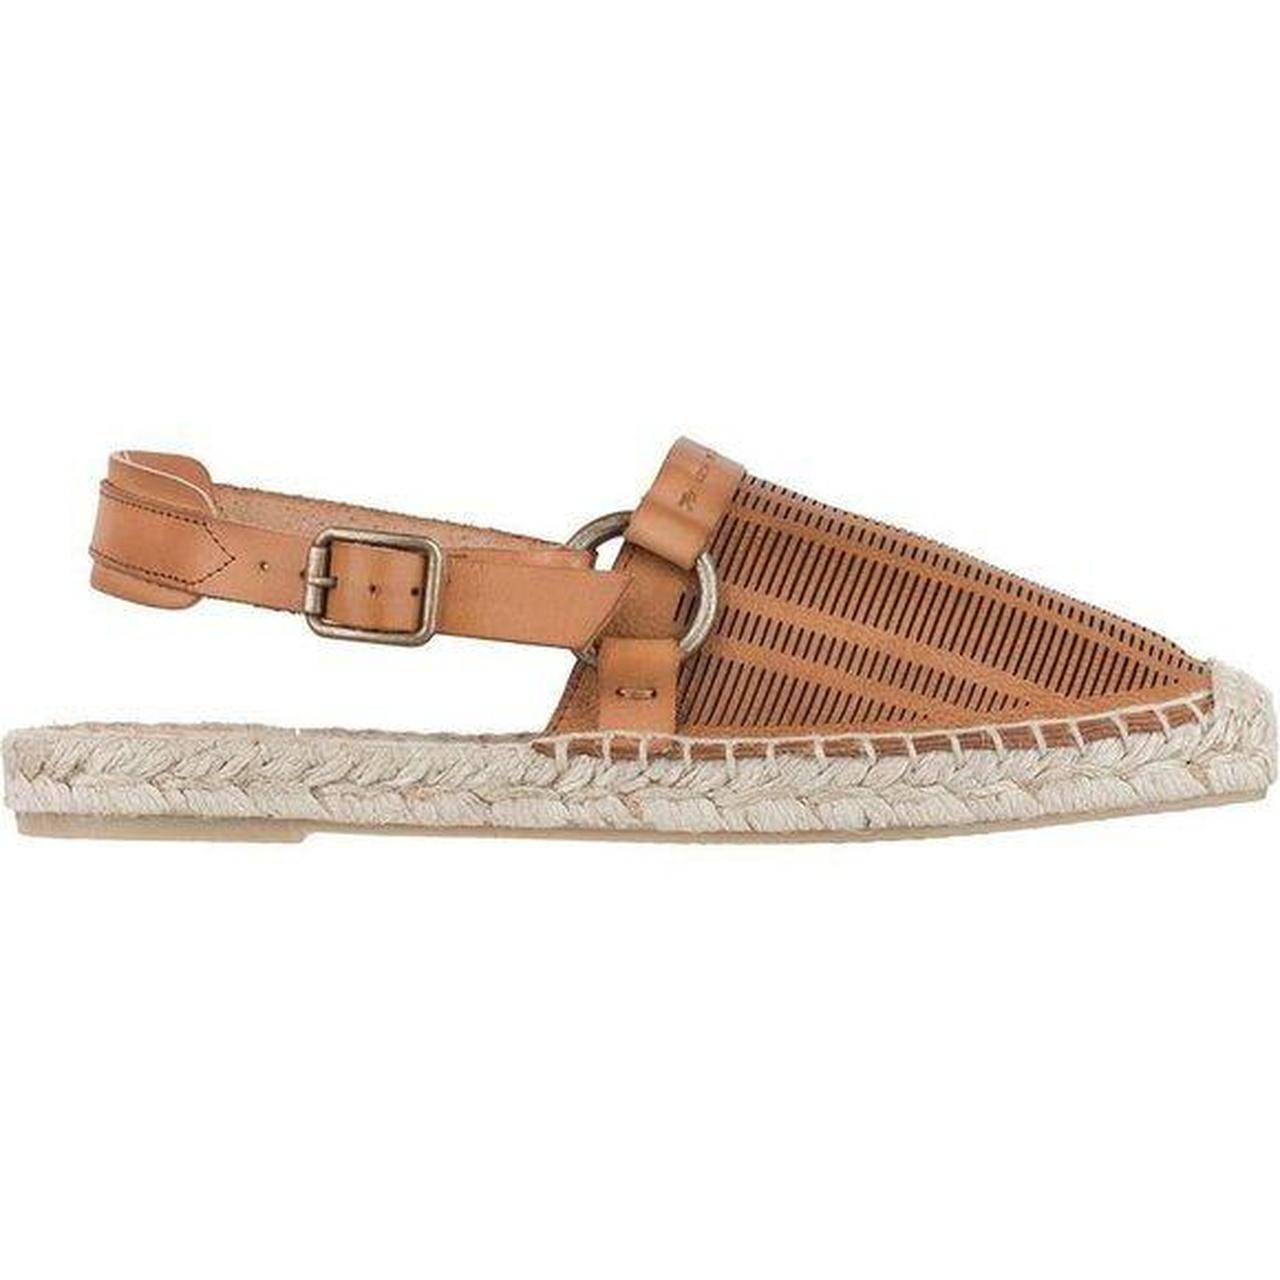 Product Image 1 - Effortless slip-on espadrilles featuring a